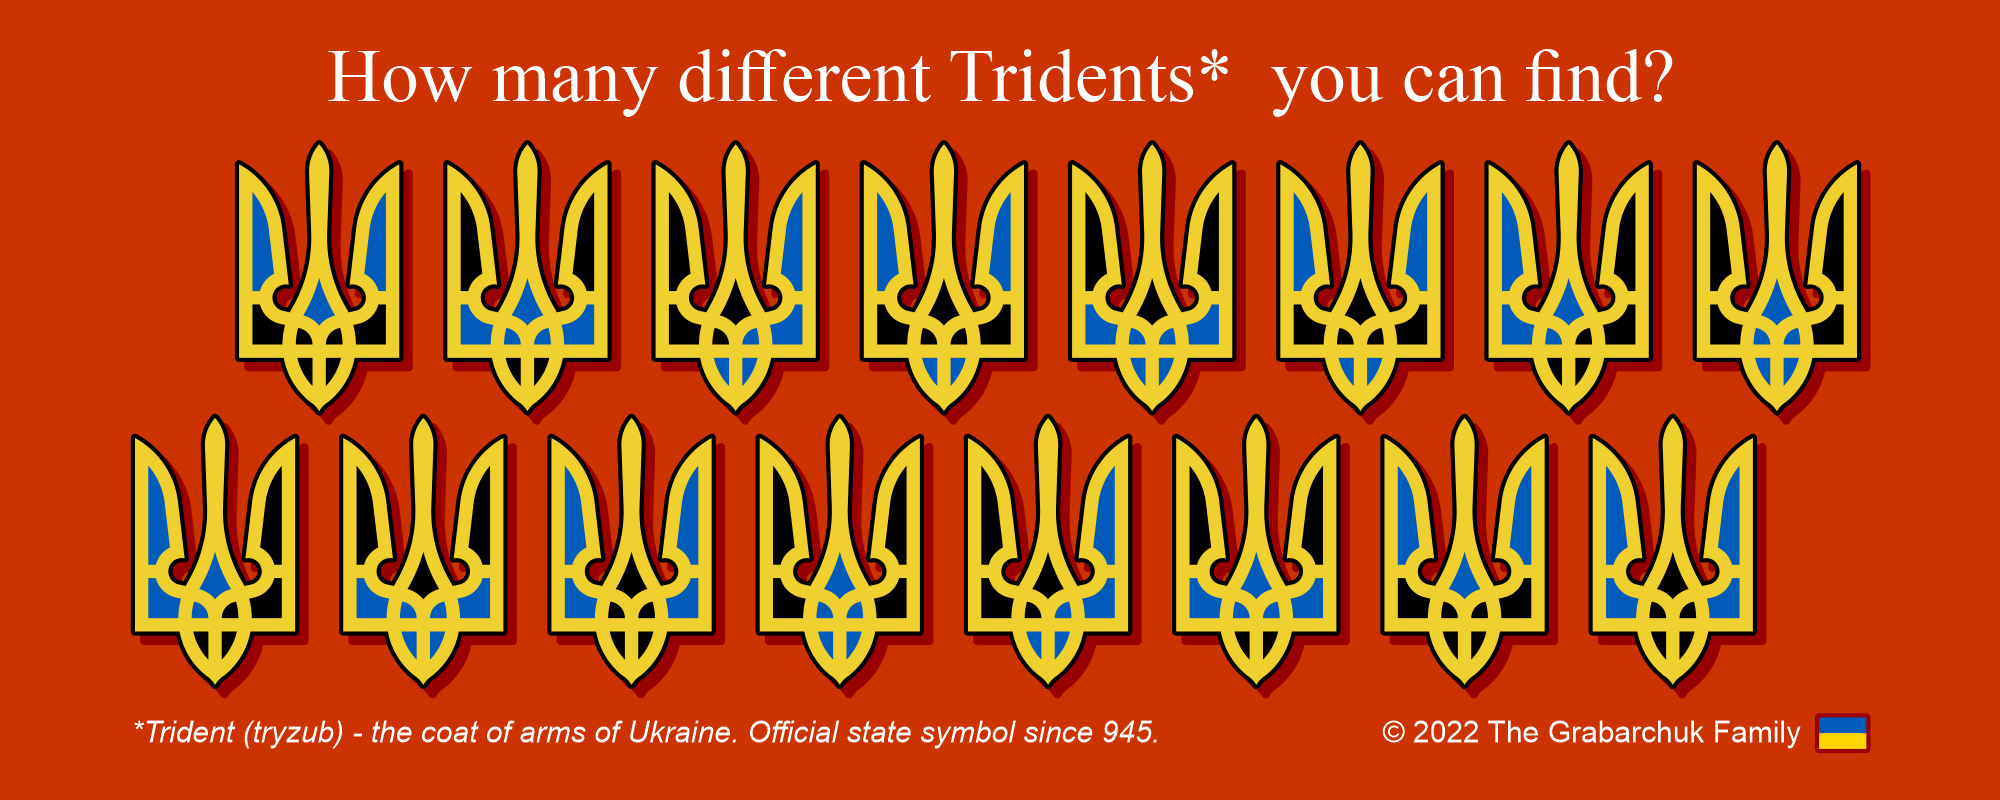 Different Tridents